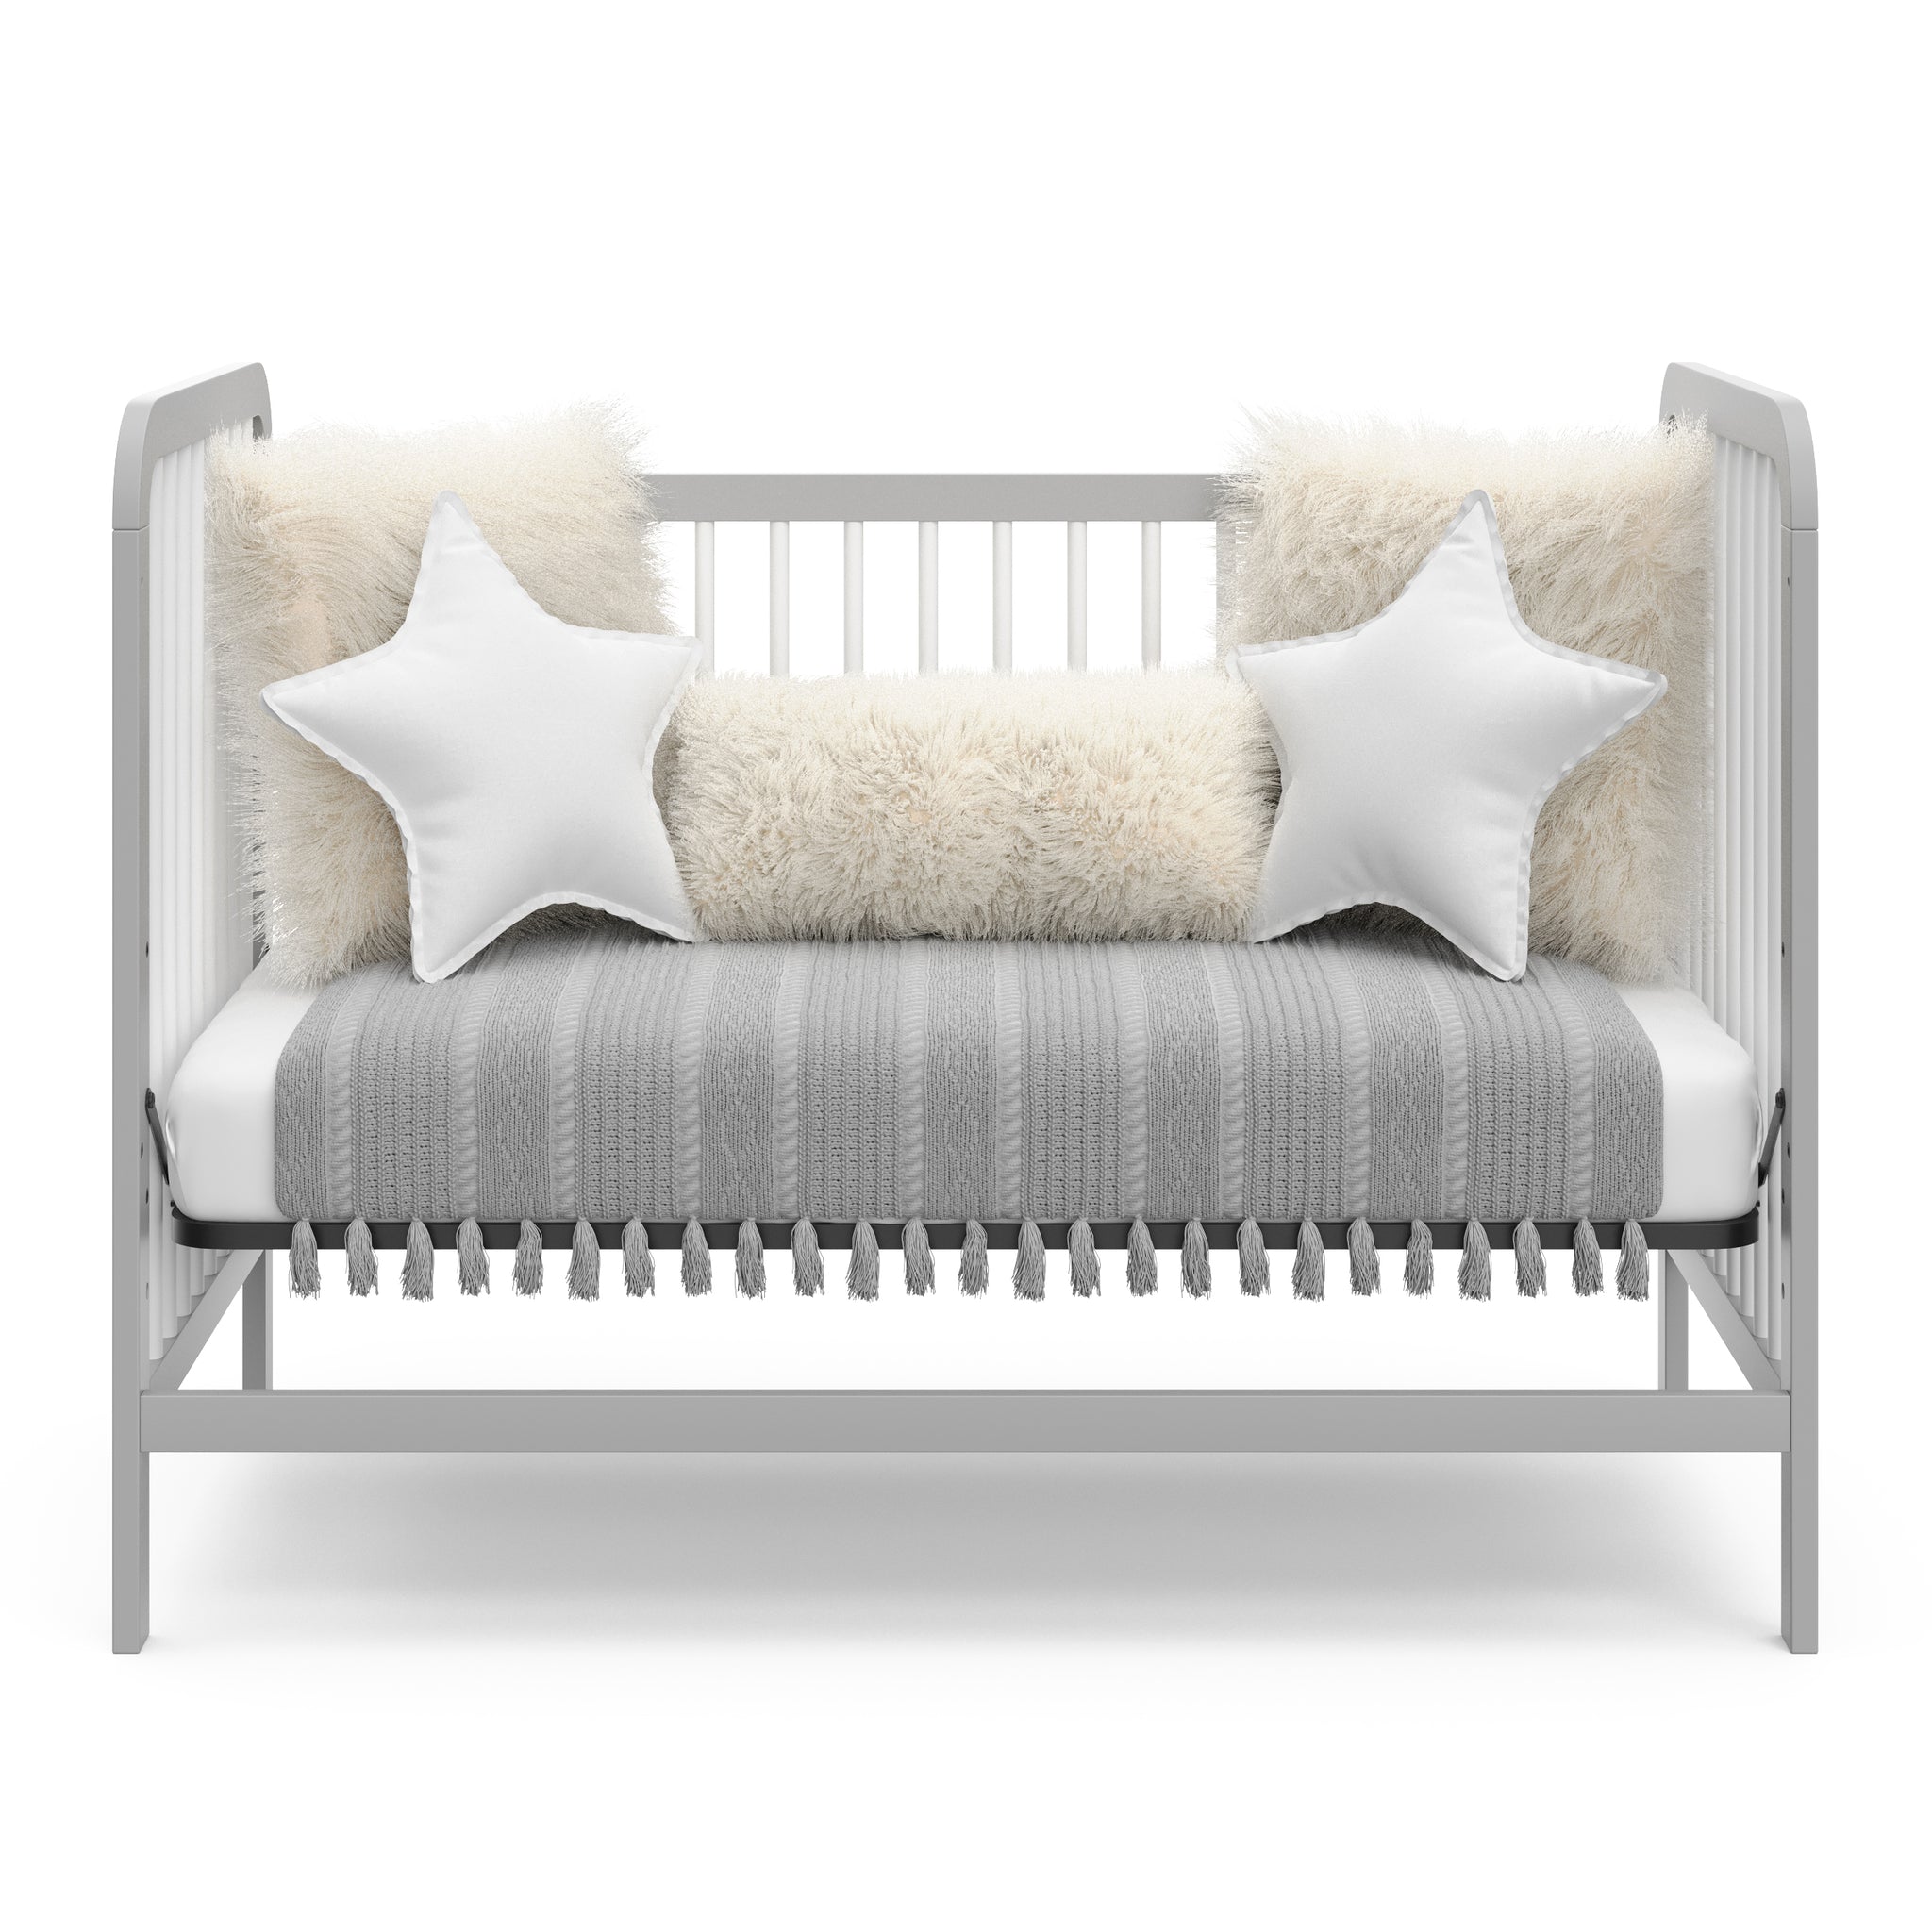 White with pebble gray crib in daybed conversion with bedding 